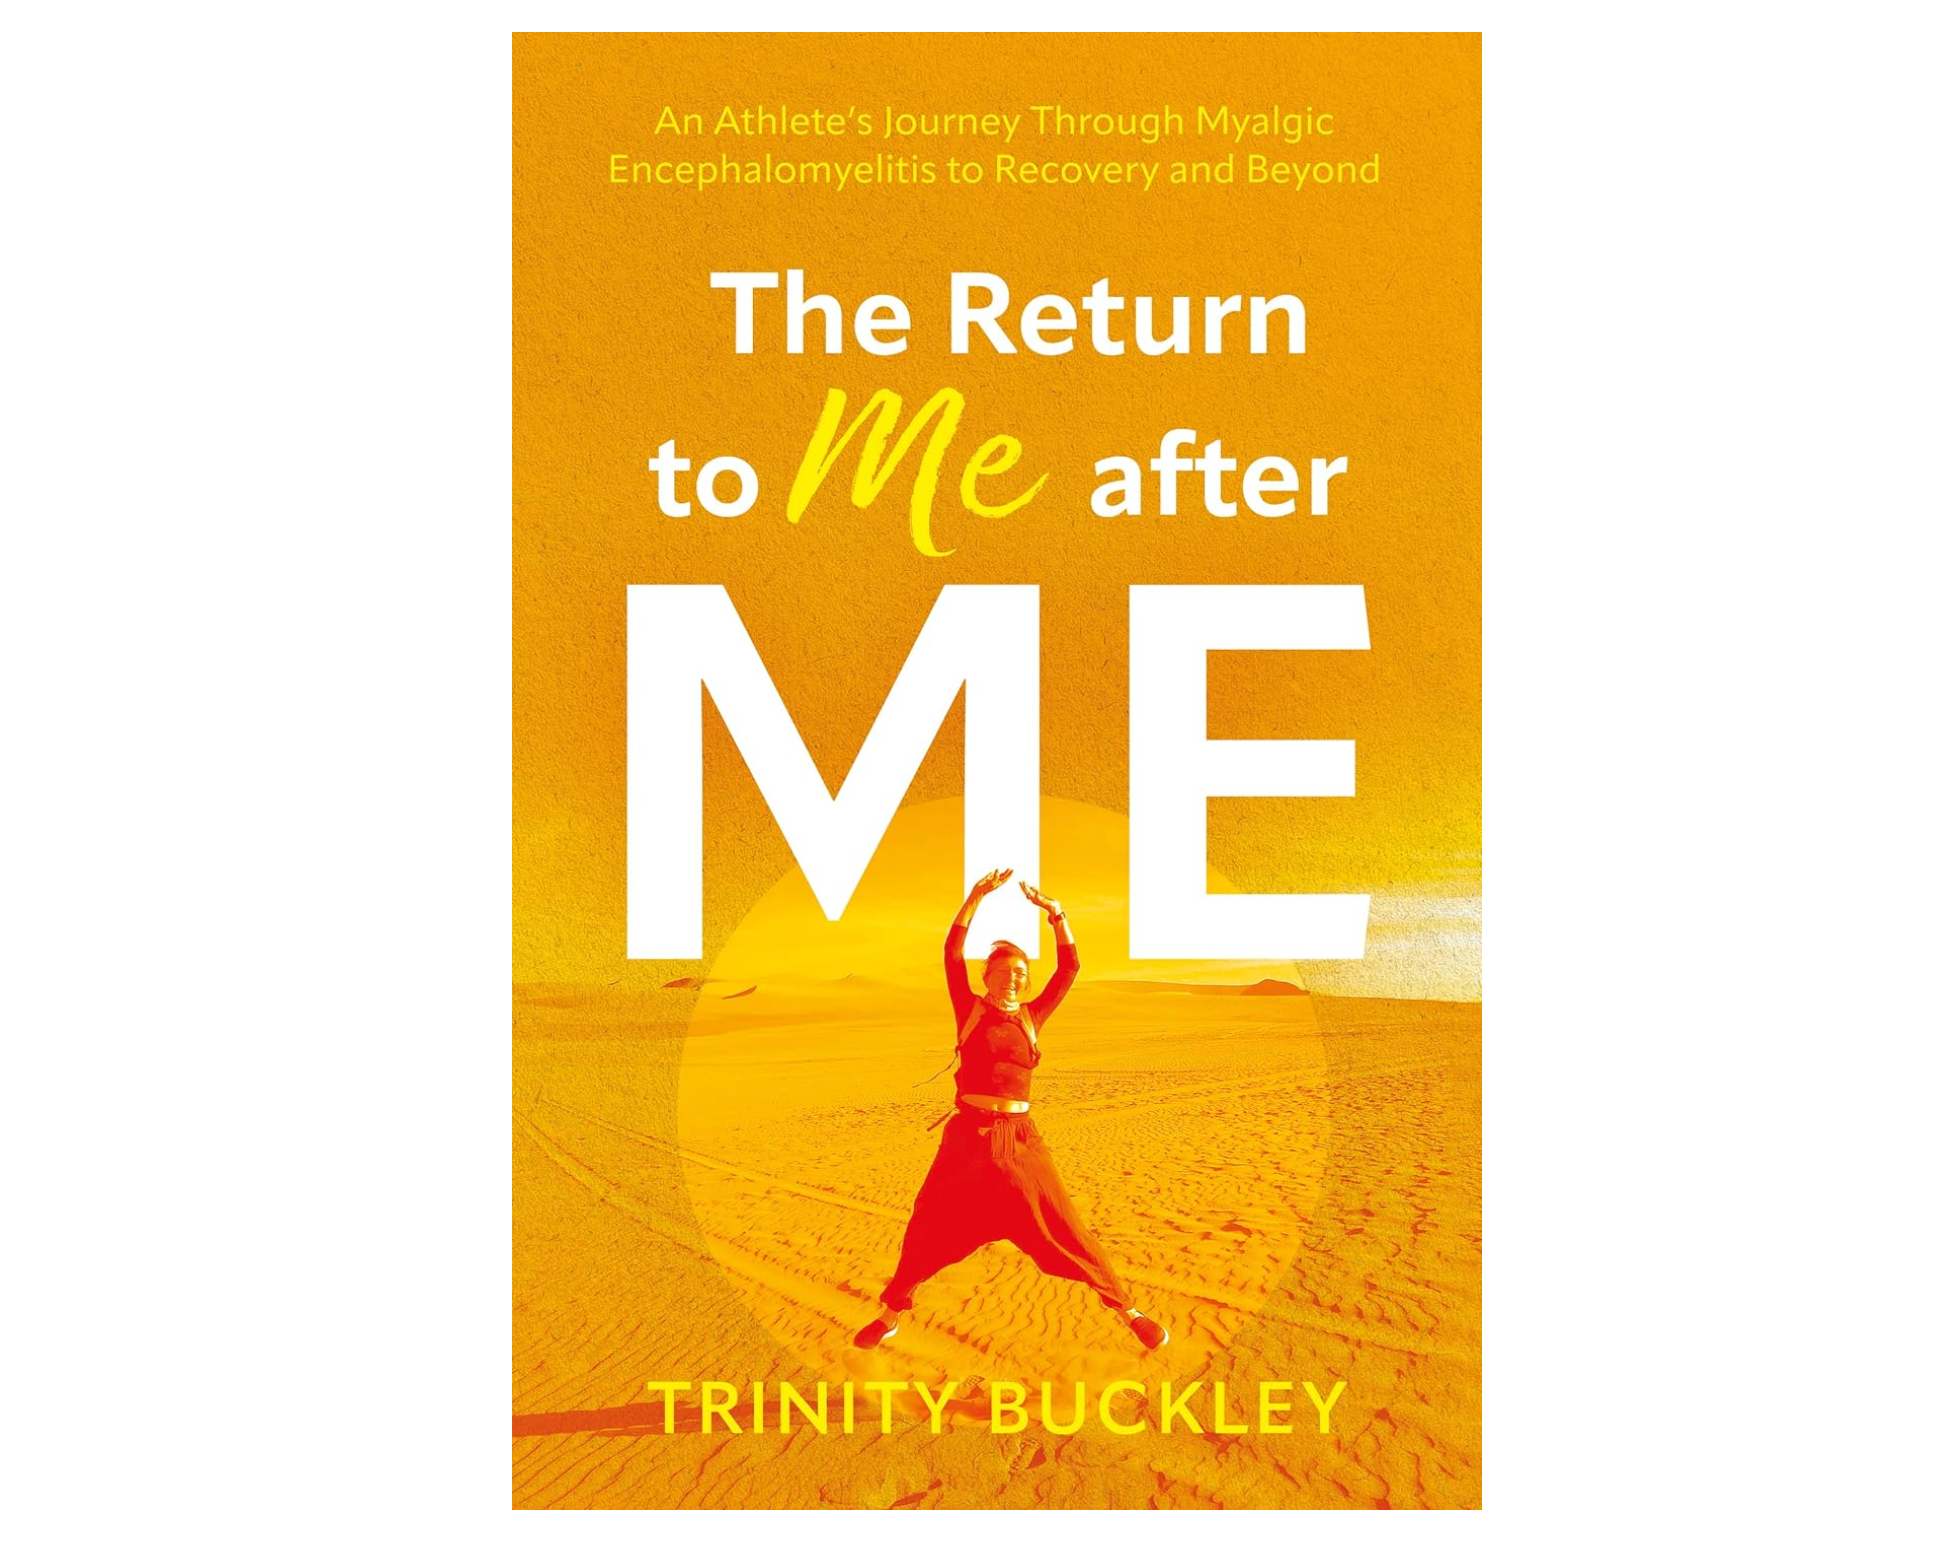 The Return to Me after Me by Trinity Buckley